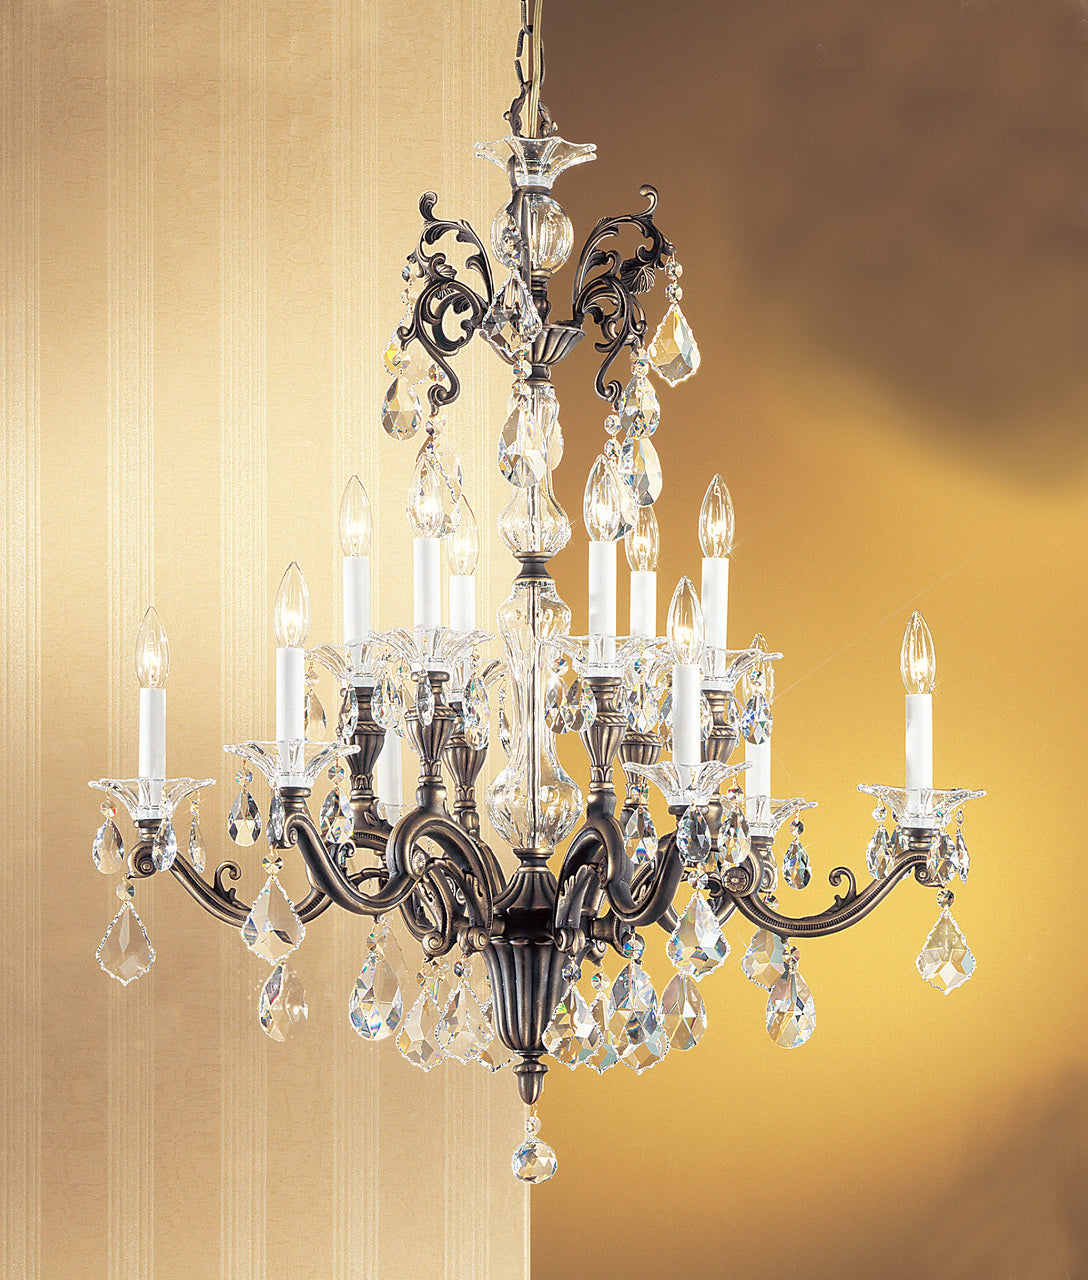 Classic Lighting 57112 RB SC Via Firenze Crystal Chandelier in Roman Bronze (Imported from Spain)